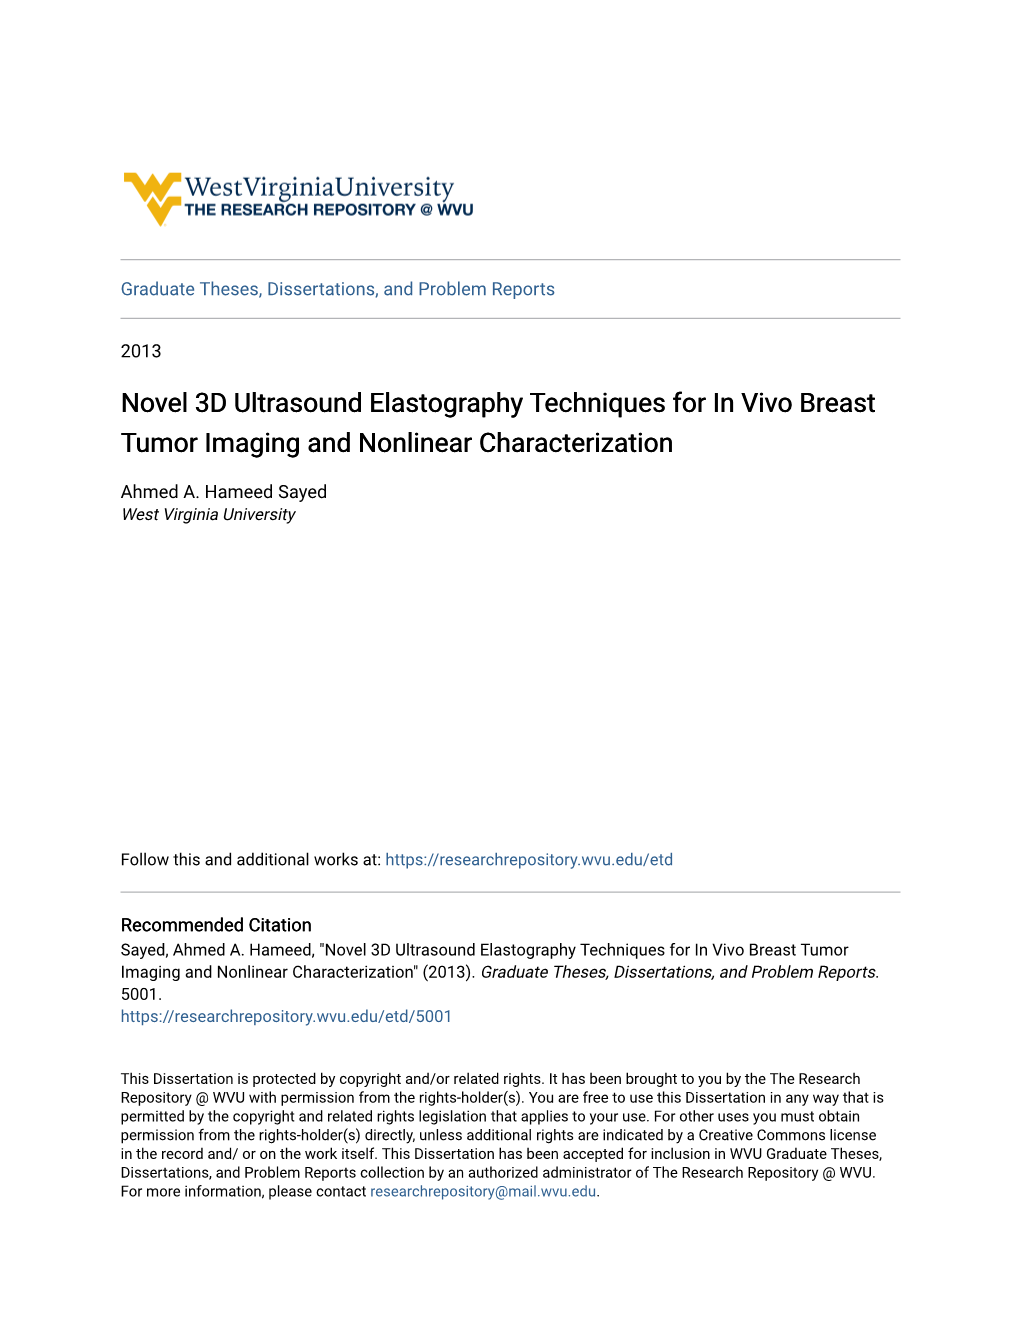 Novel 3D Ultrasound Elastography Techniques for in Vivo Breast Tumor Imaging and Nonlinear Characterization